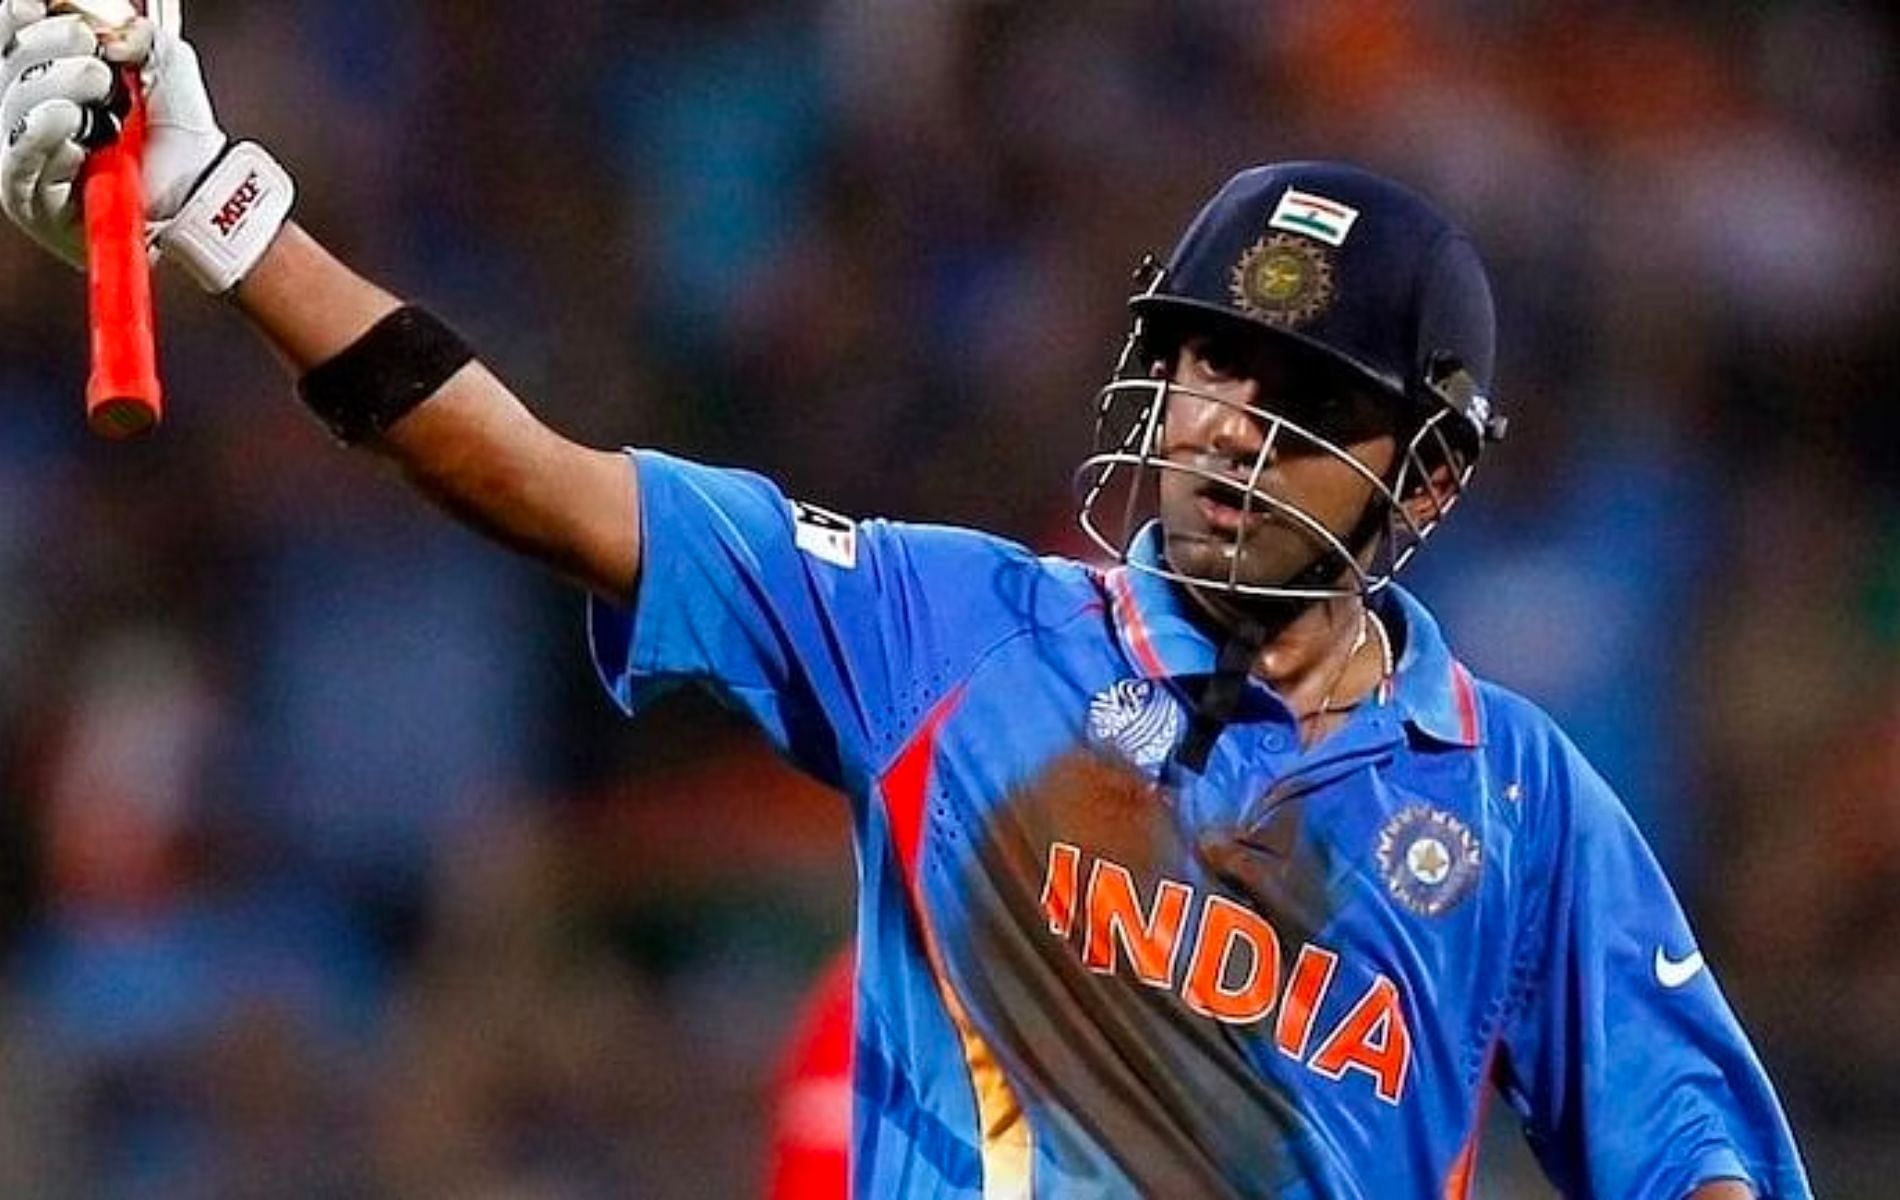 Gautam Gambhir narrowly missed out on a century in 2011 World Cup final. (Pic: X)